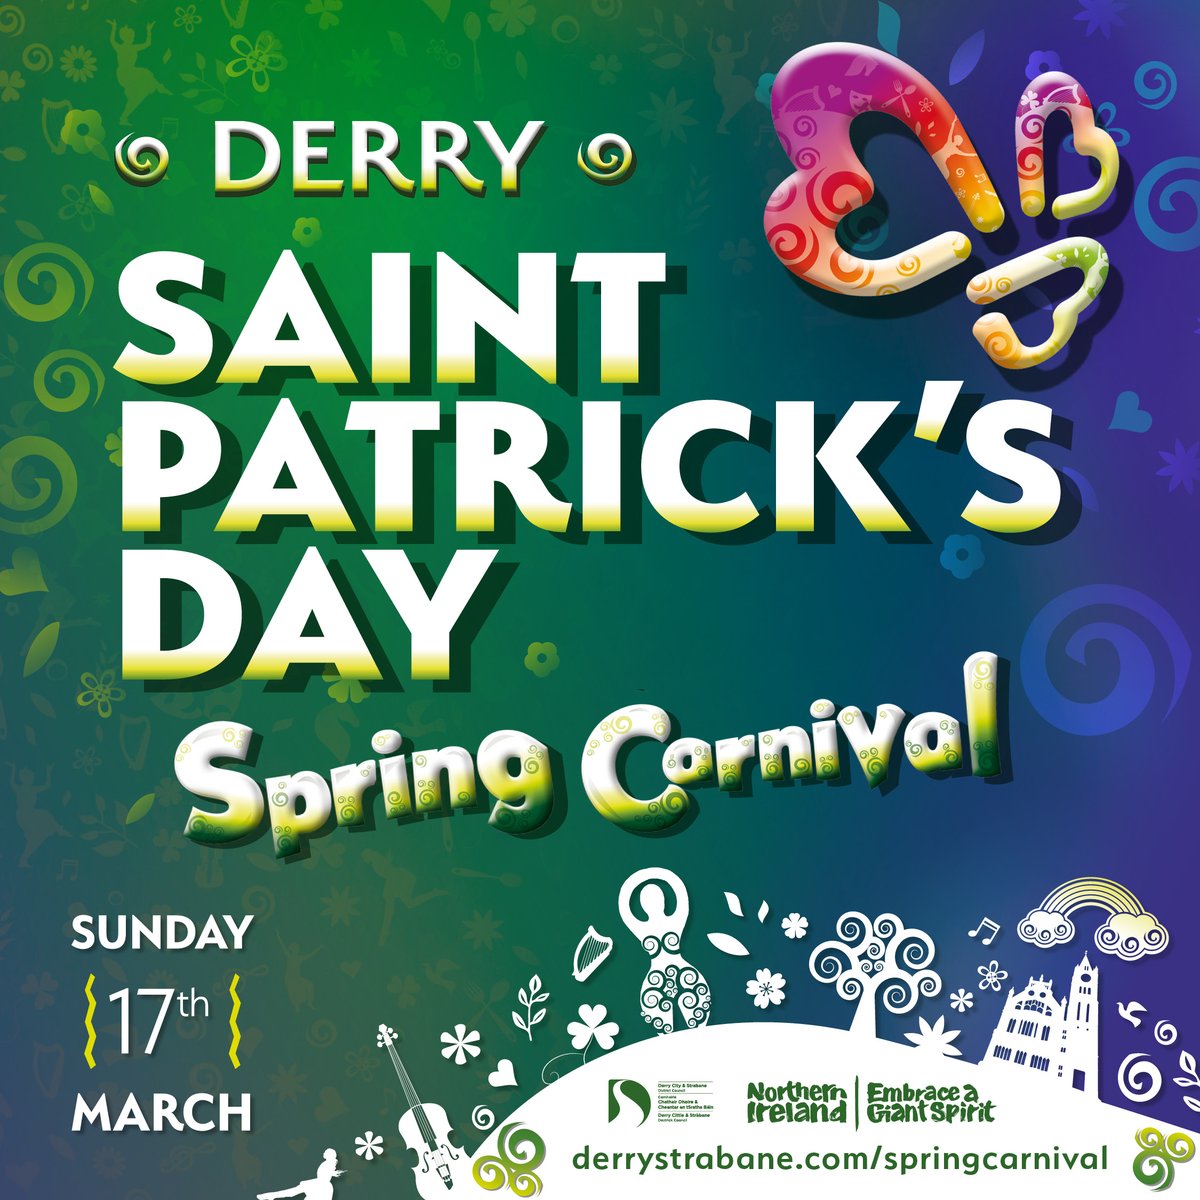 ☘️ The St Patrick's Day, Spring Carnival Parade returns to the city on Sunday 17th March! There's something for everyone with activities for all the family! 🎉 Find out more and join in on the fun: pulse.ly/ux7horrmfz #spingcarnival #familyfun #discoverni #mygiantadventure